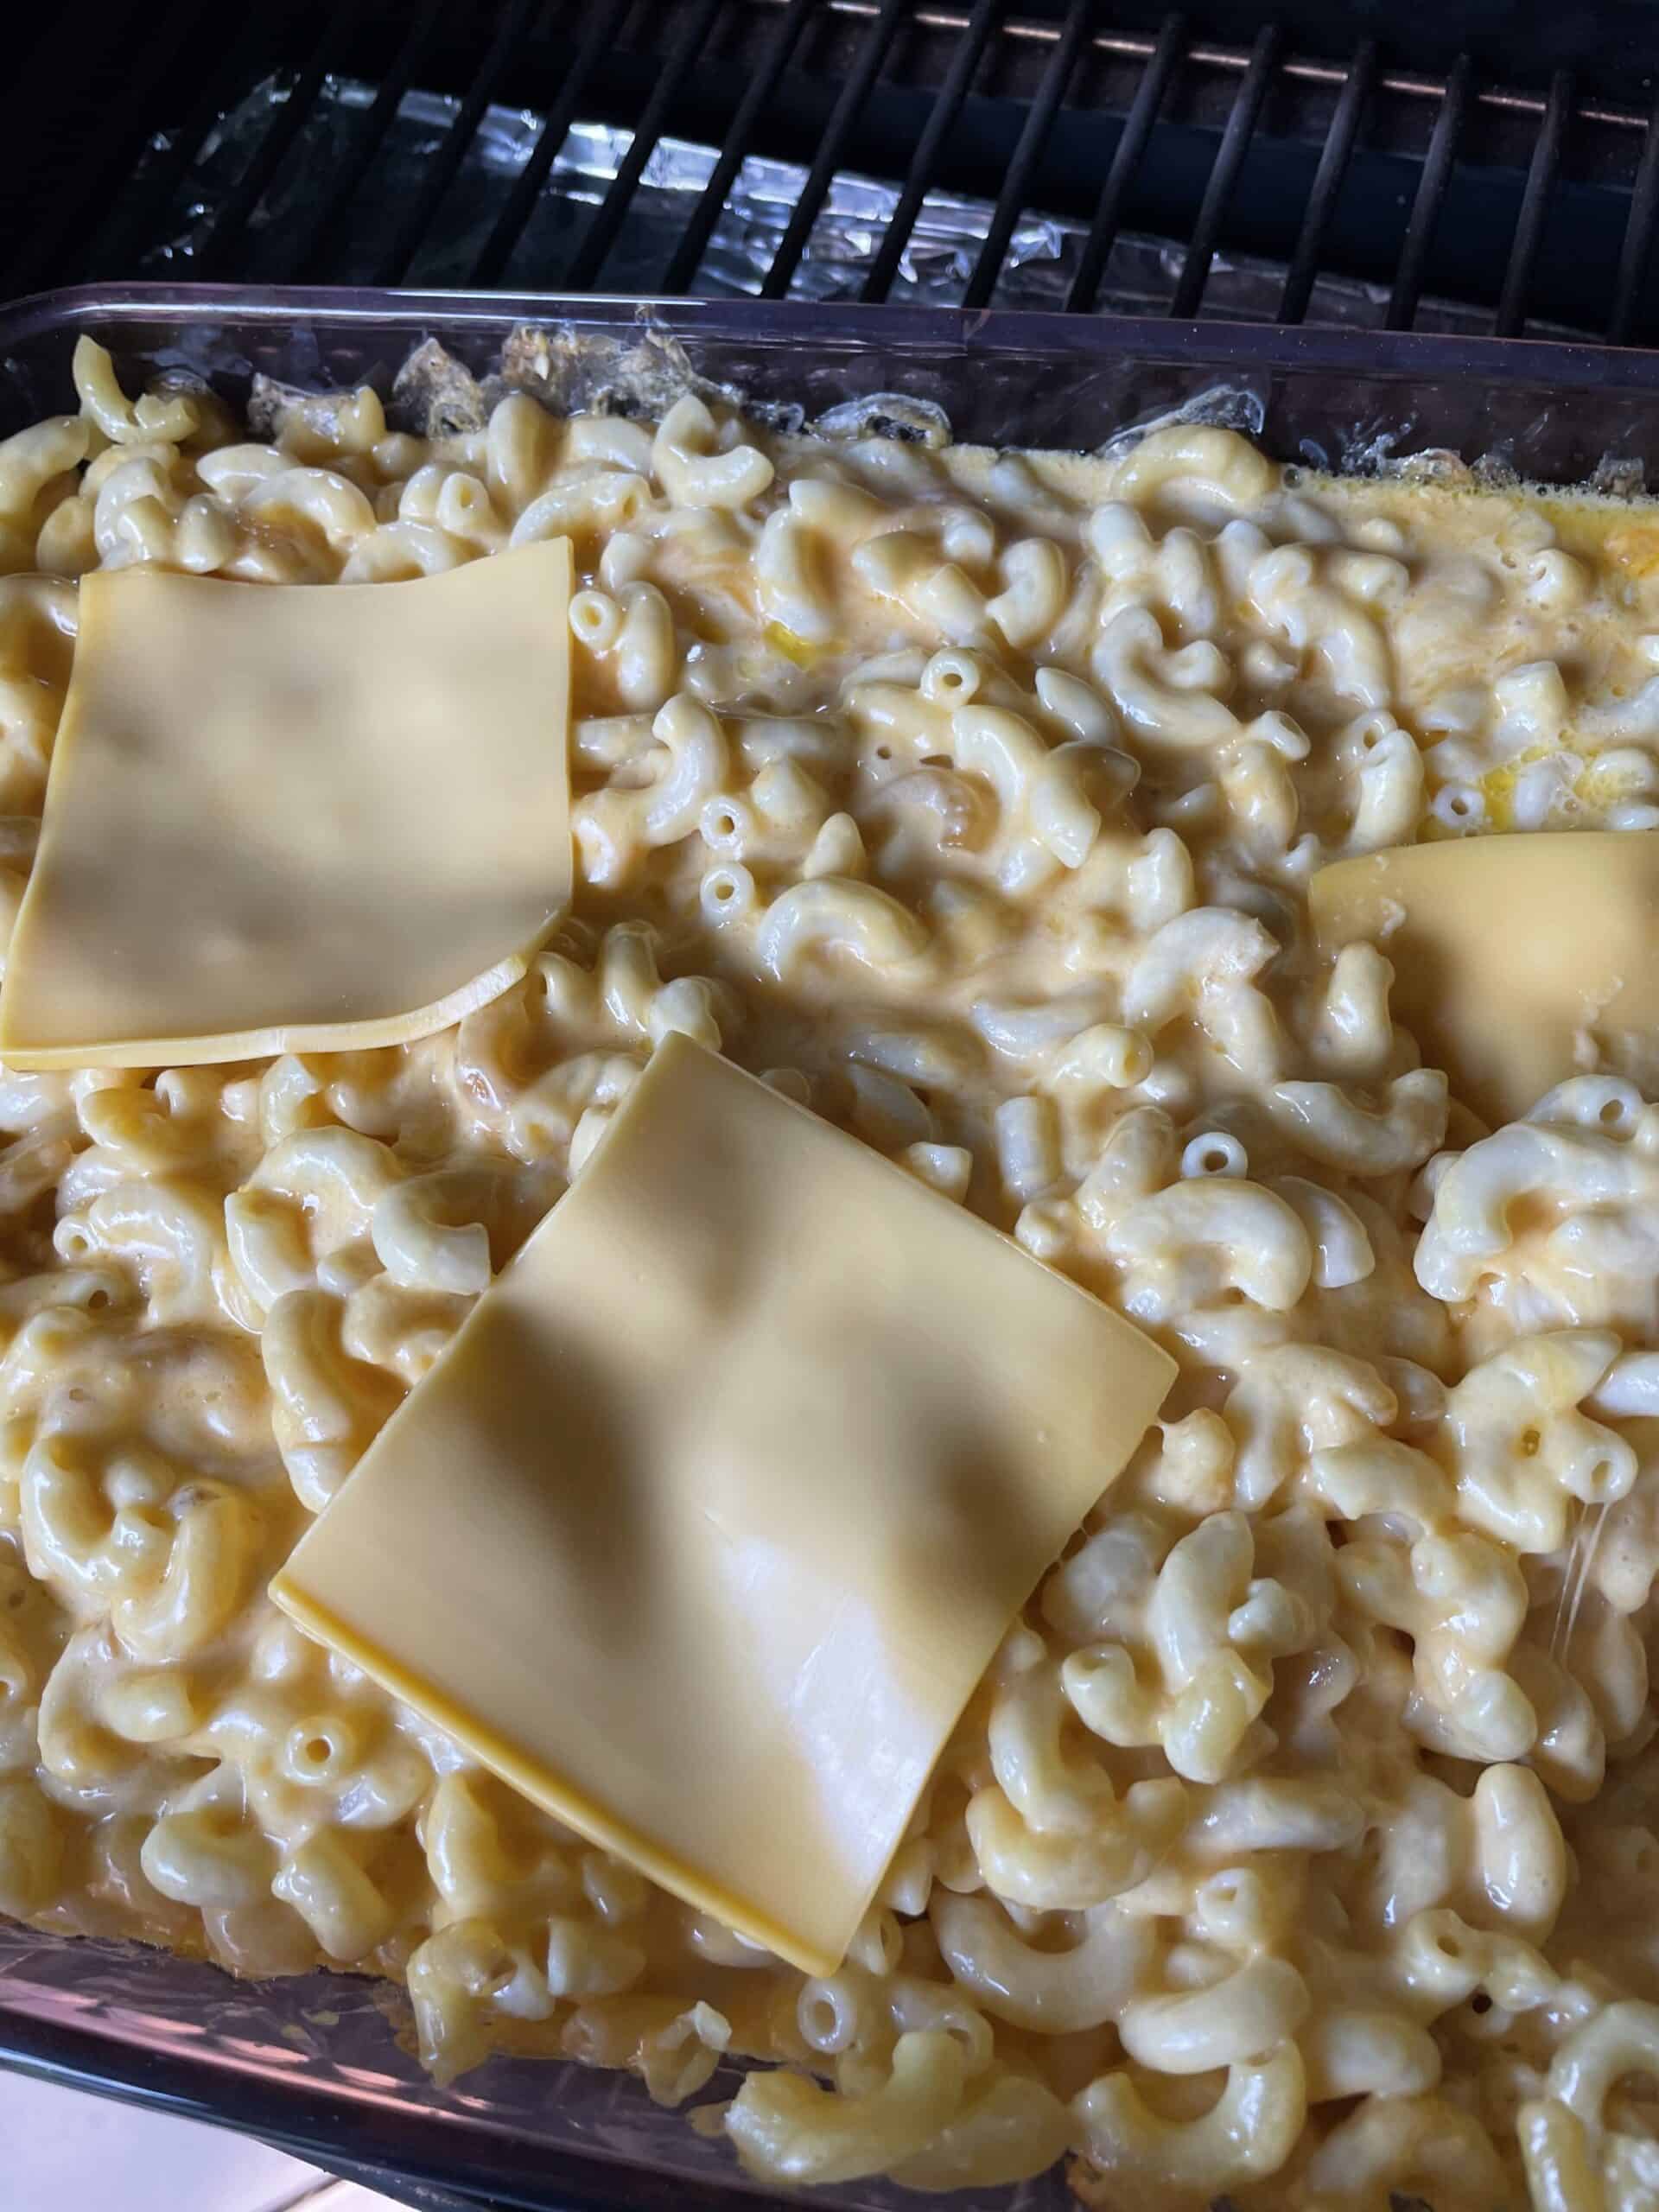 Adding the last of the American cheese slices to the smoked mac n cheese.